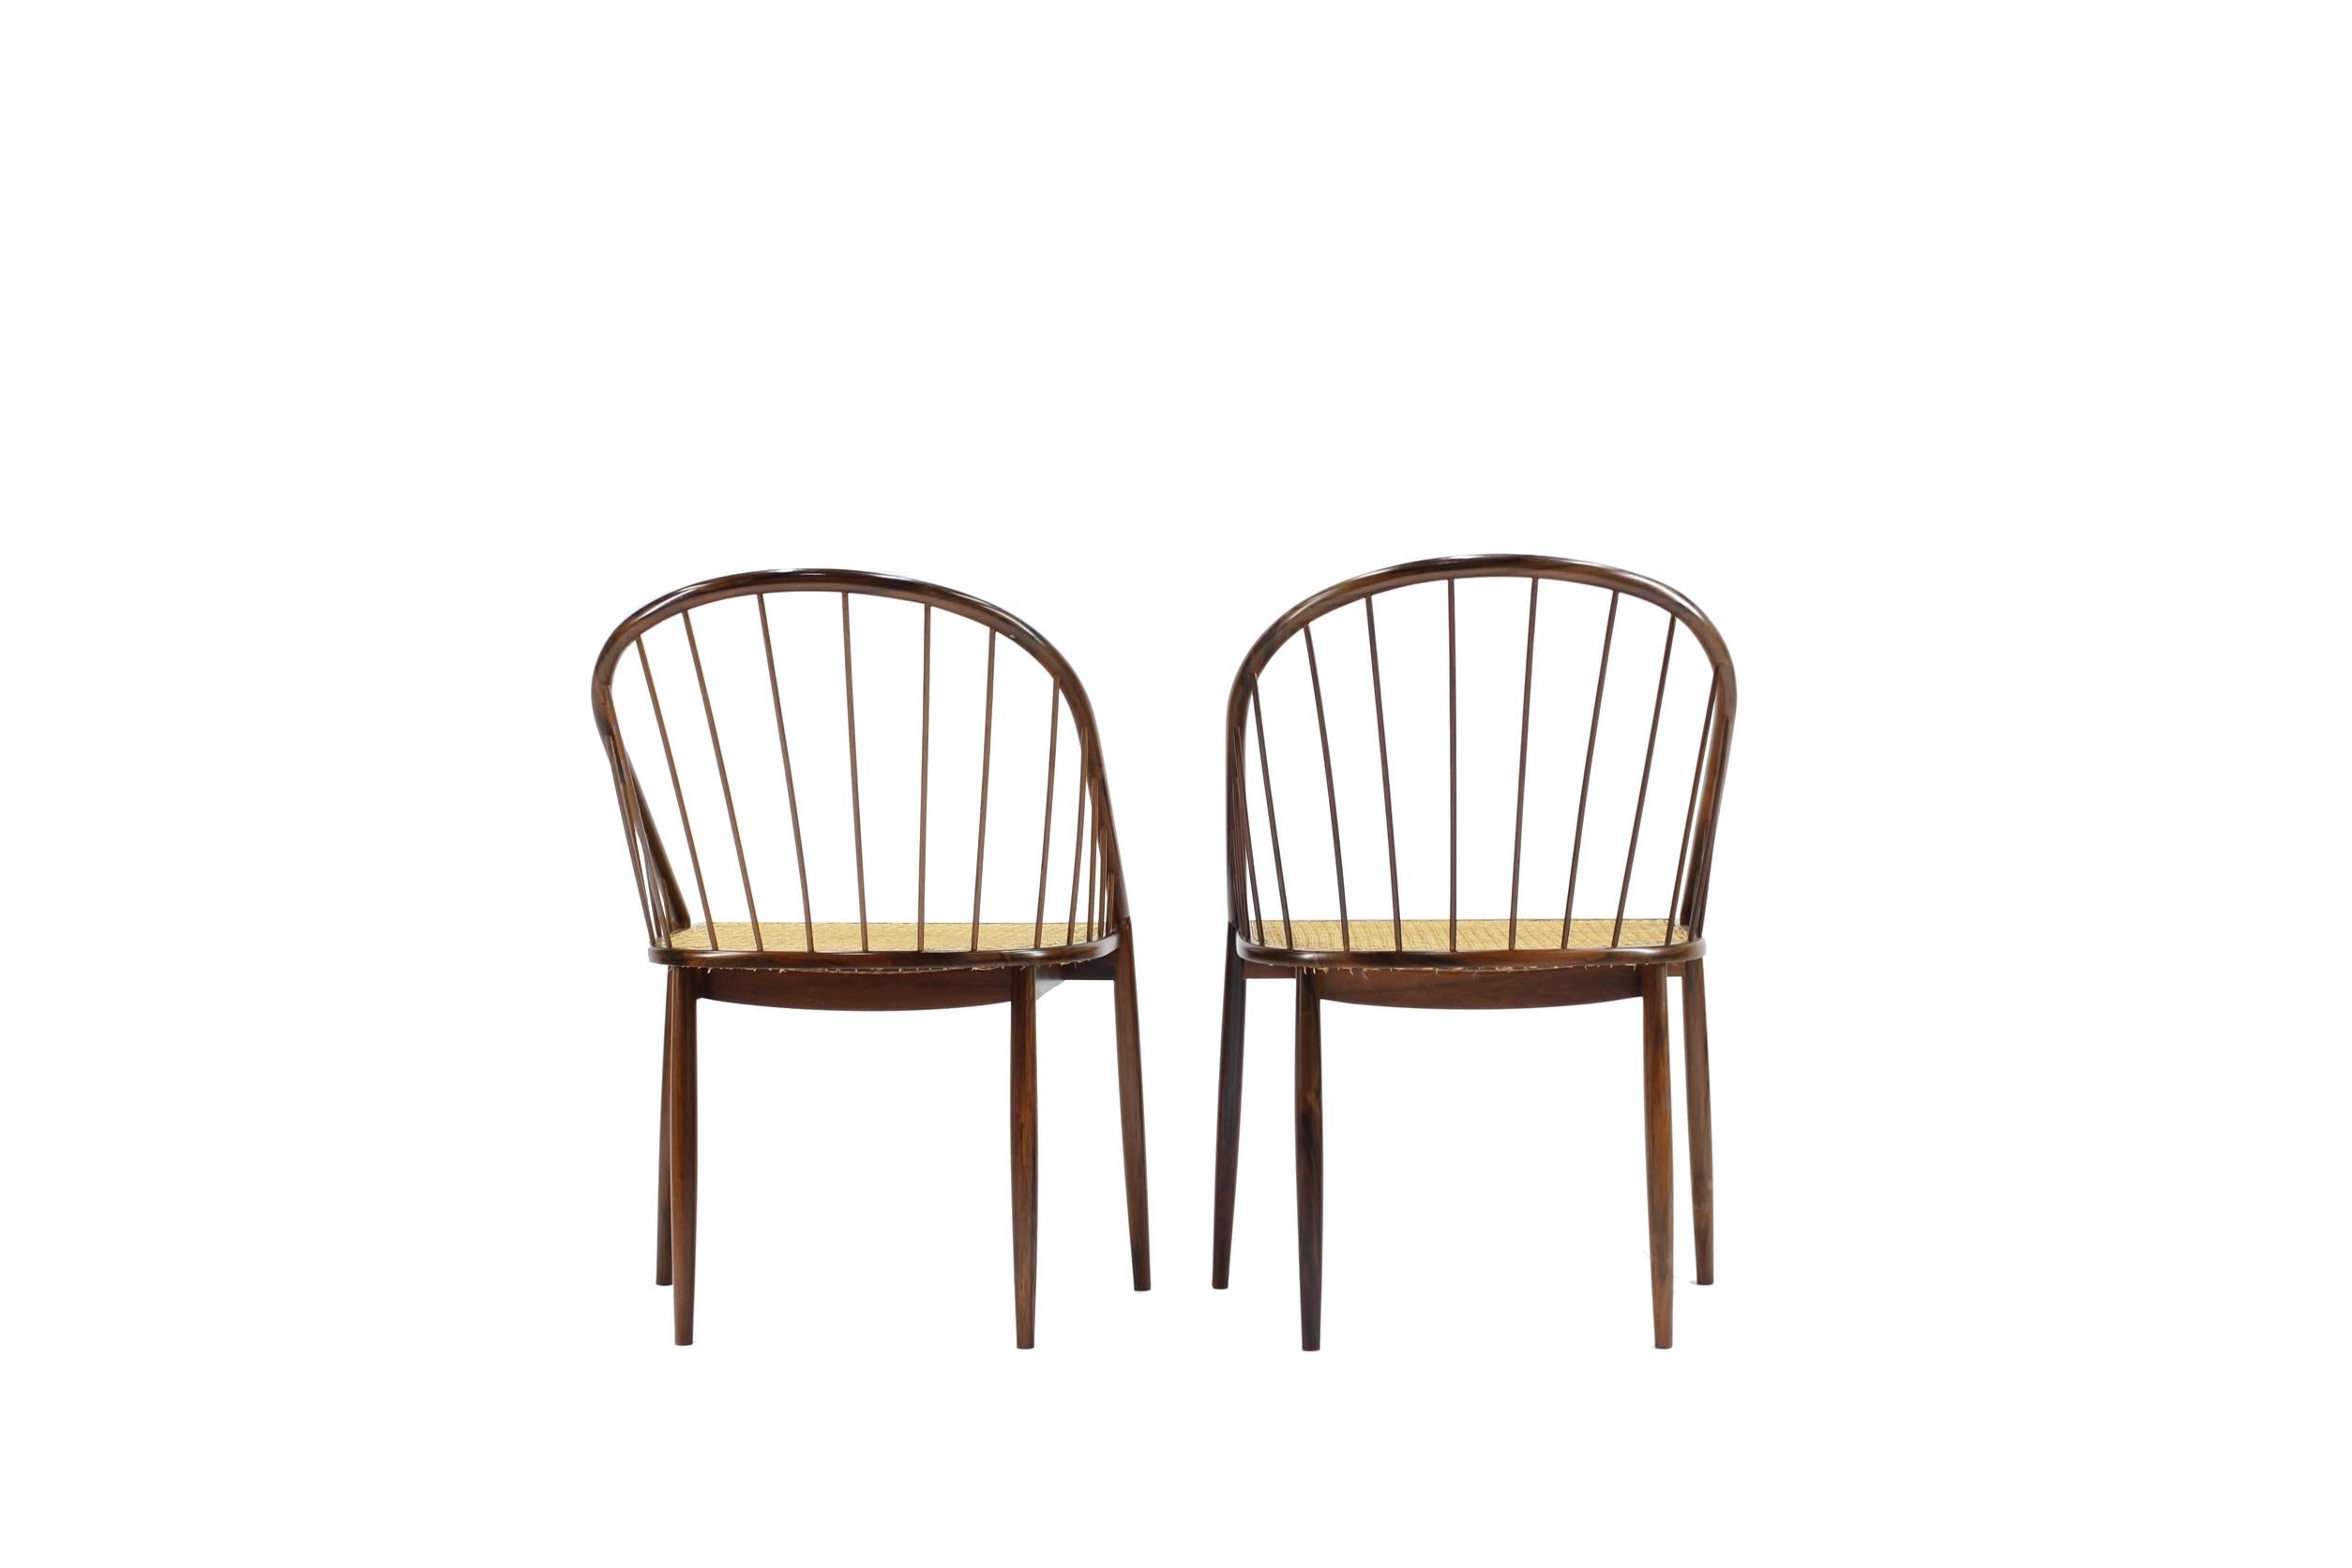 Hand-Carved Pair of Curva chair by Joaquim Tenreiro, Mid-Century Modern-Vintage 60' For Sale